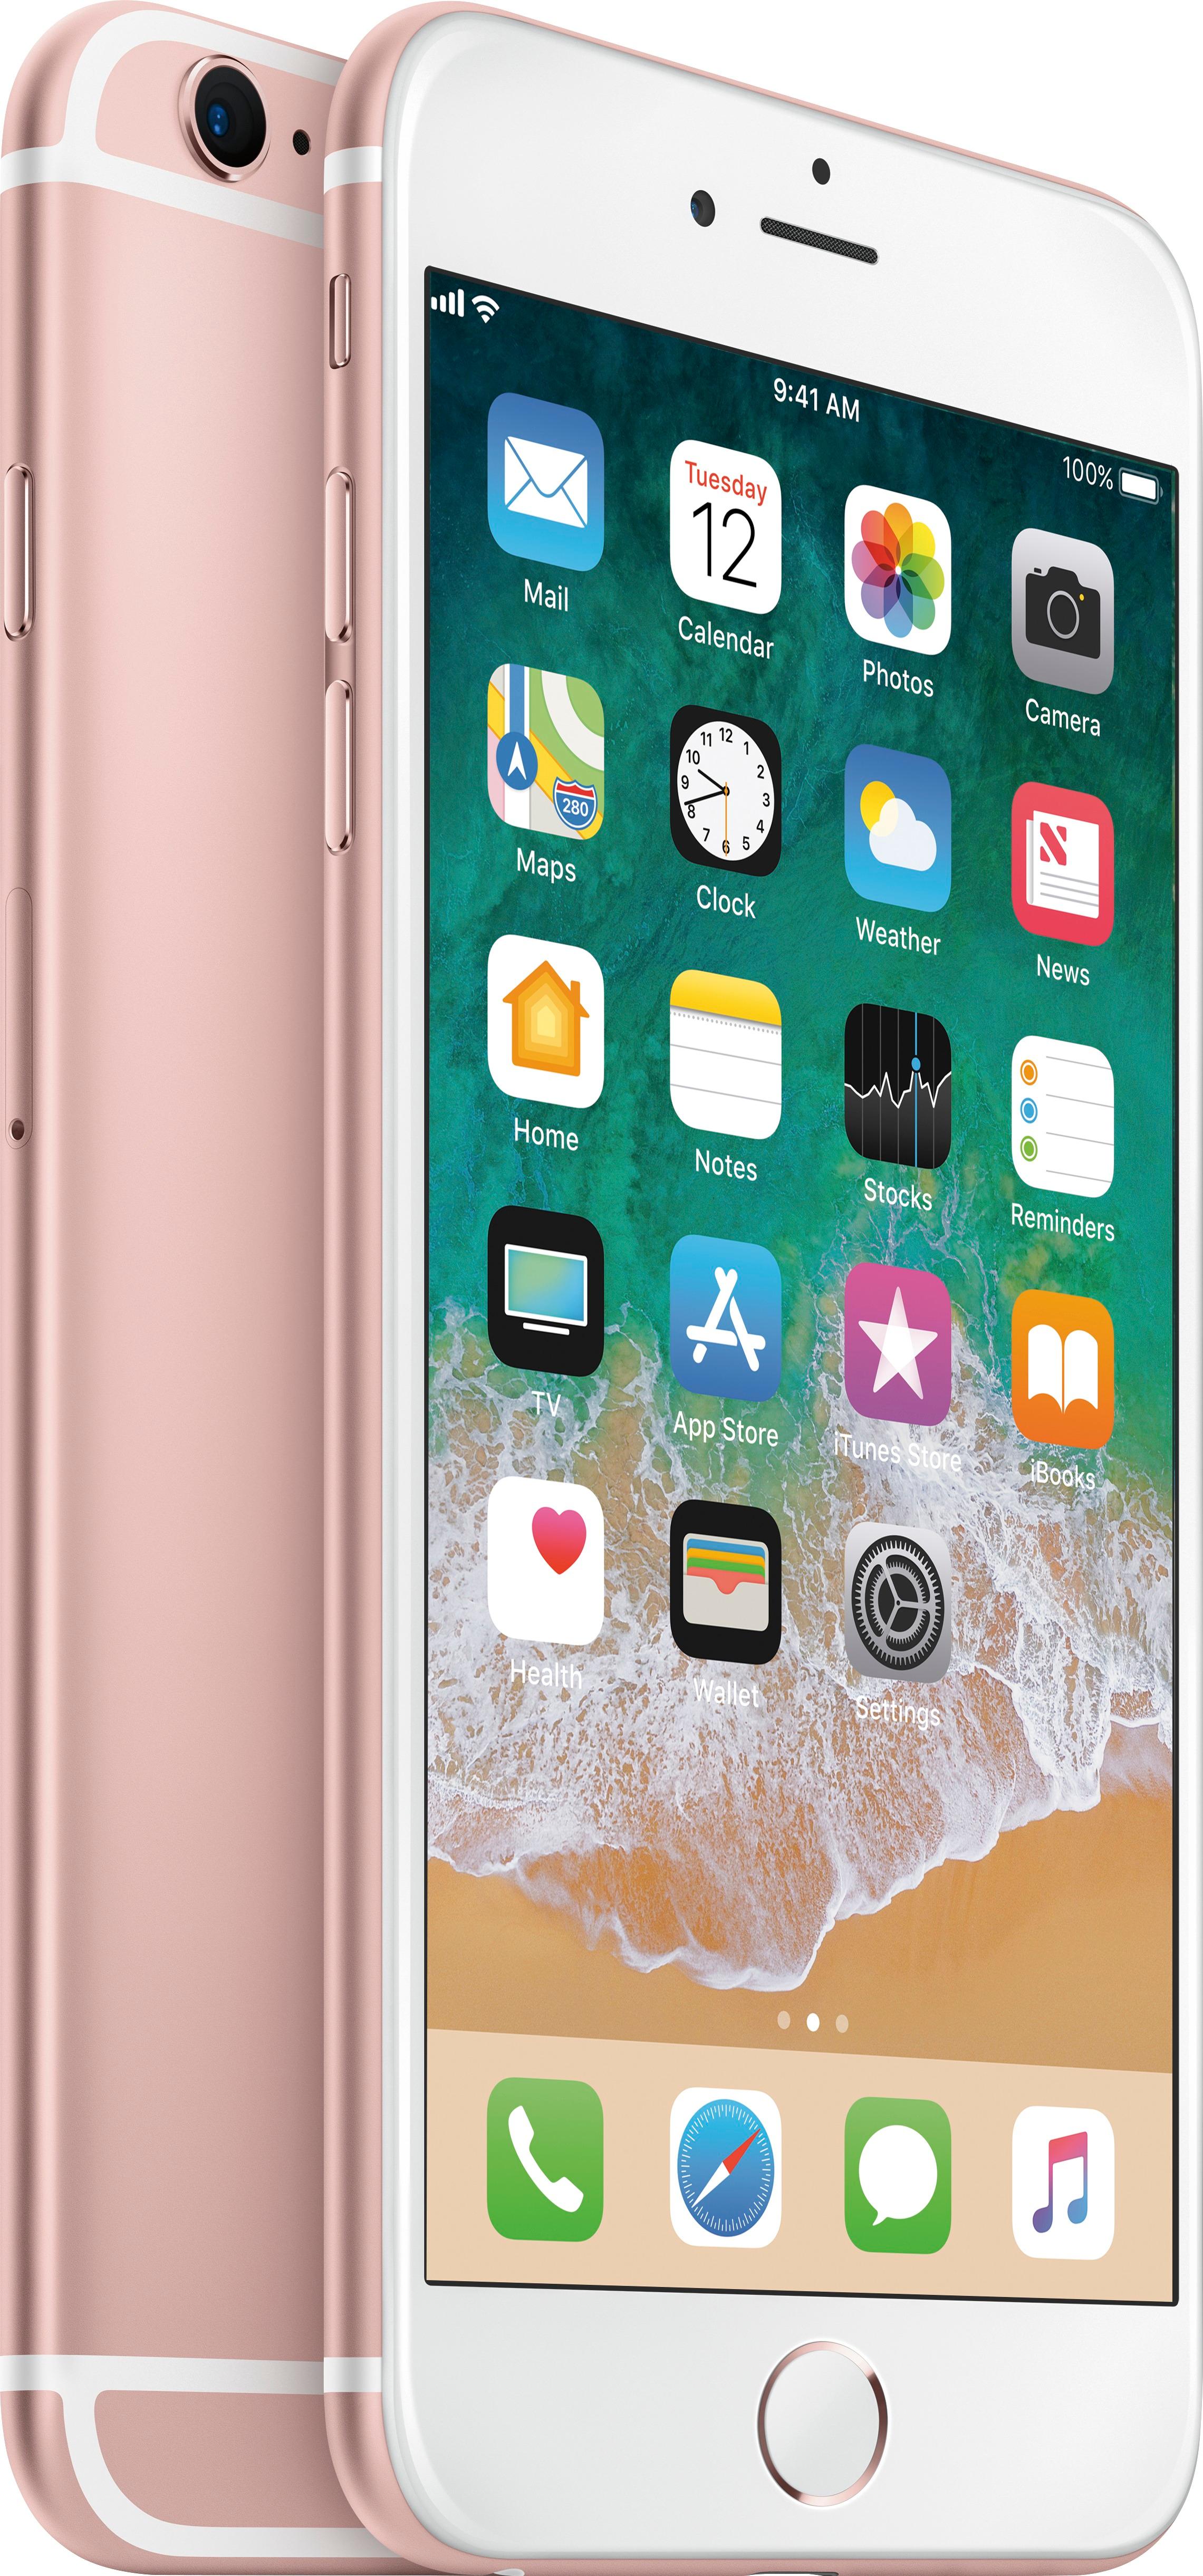 Customer Reviews Apple iPhone 6s Plus 64GB Rose Gold (AT&T) MKTU2LL/A